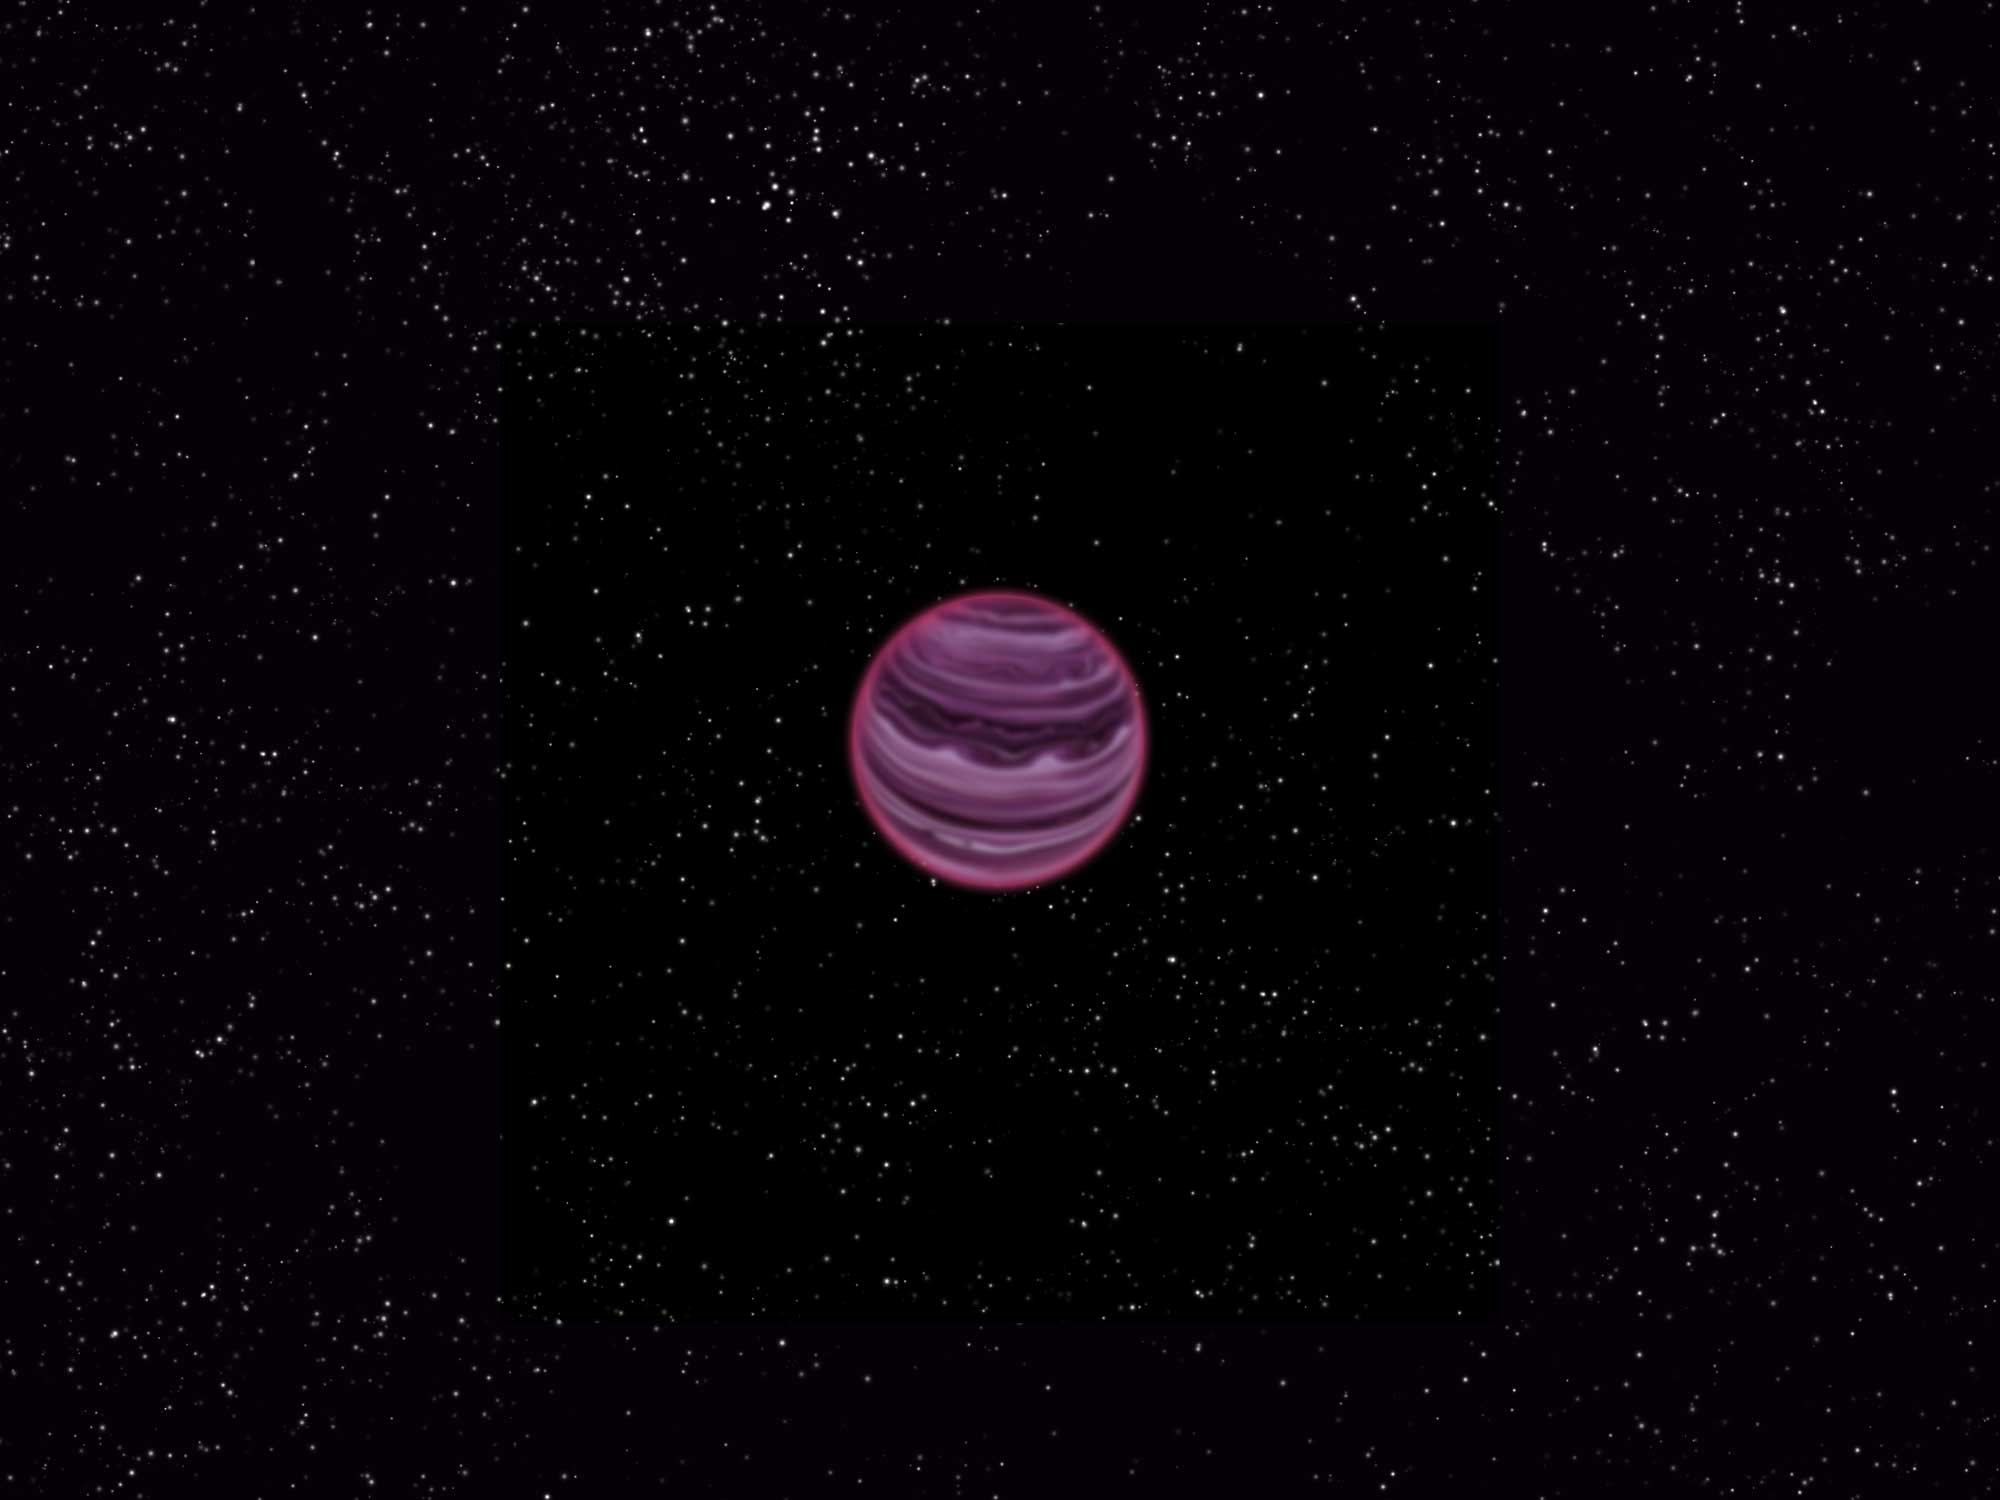 Artist’s conception of the free-floating planet PSO J318. Credit: MPIA/V. Ch. Quetz